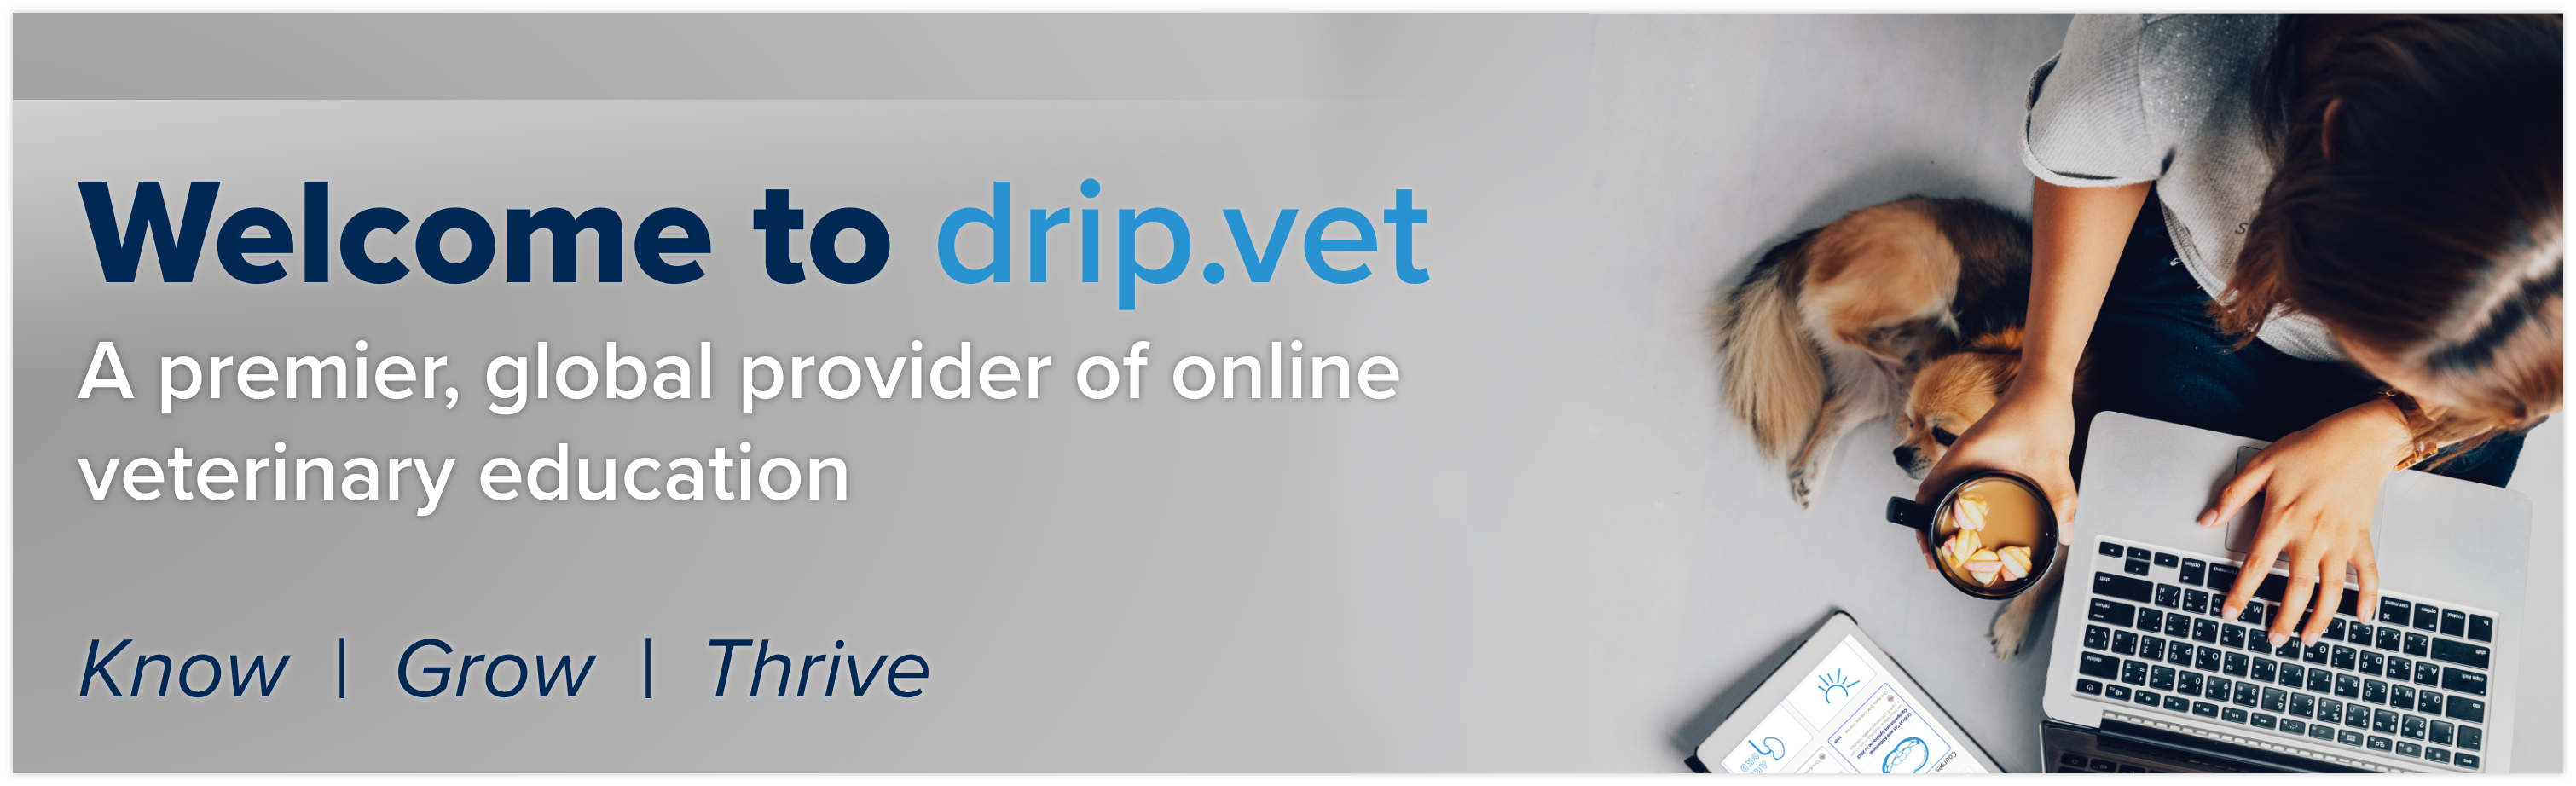 Welcome to drip vet. A premier, global provider of online veterinary education. Know, Grow, Thrive